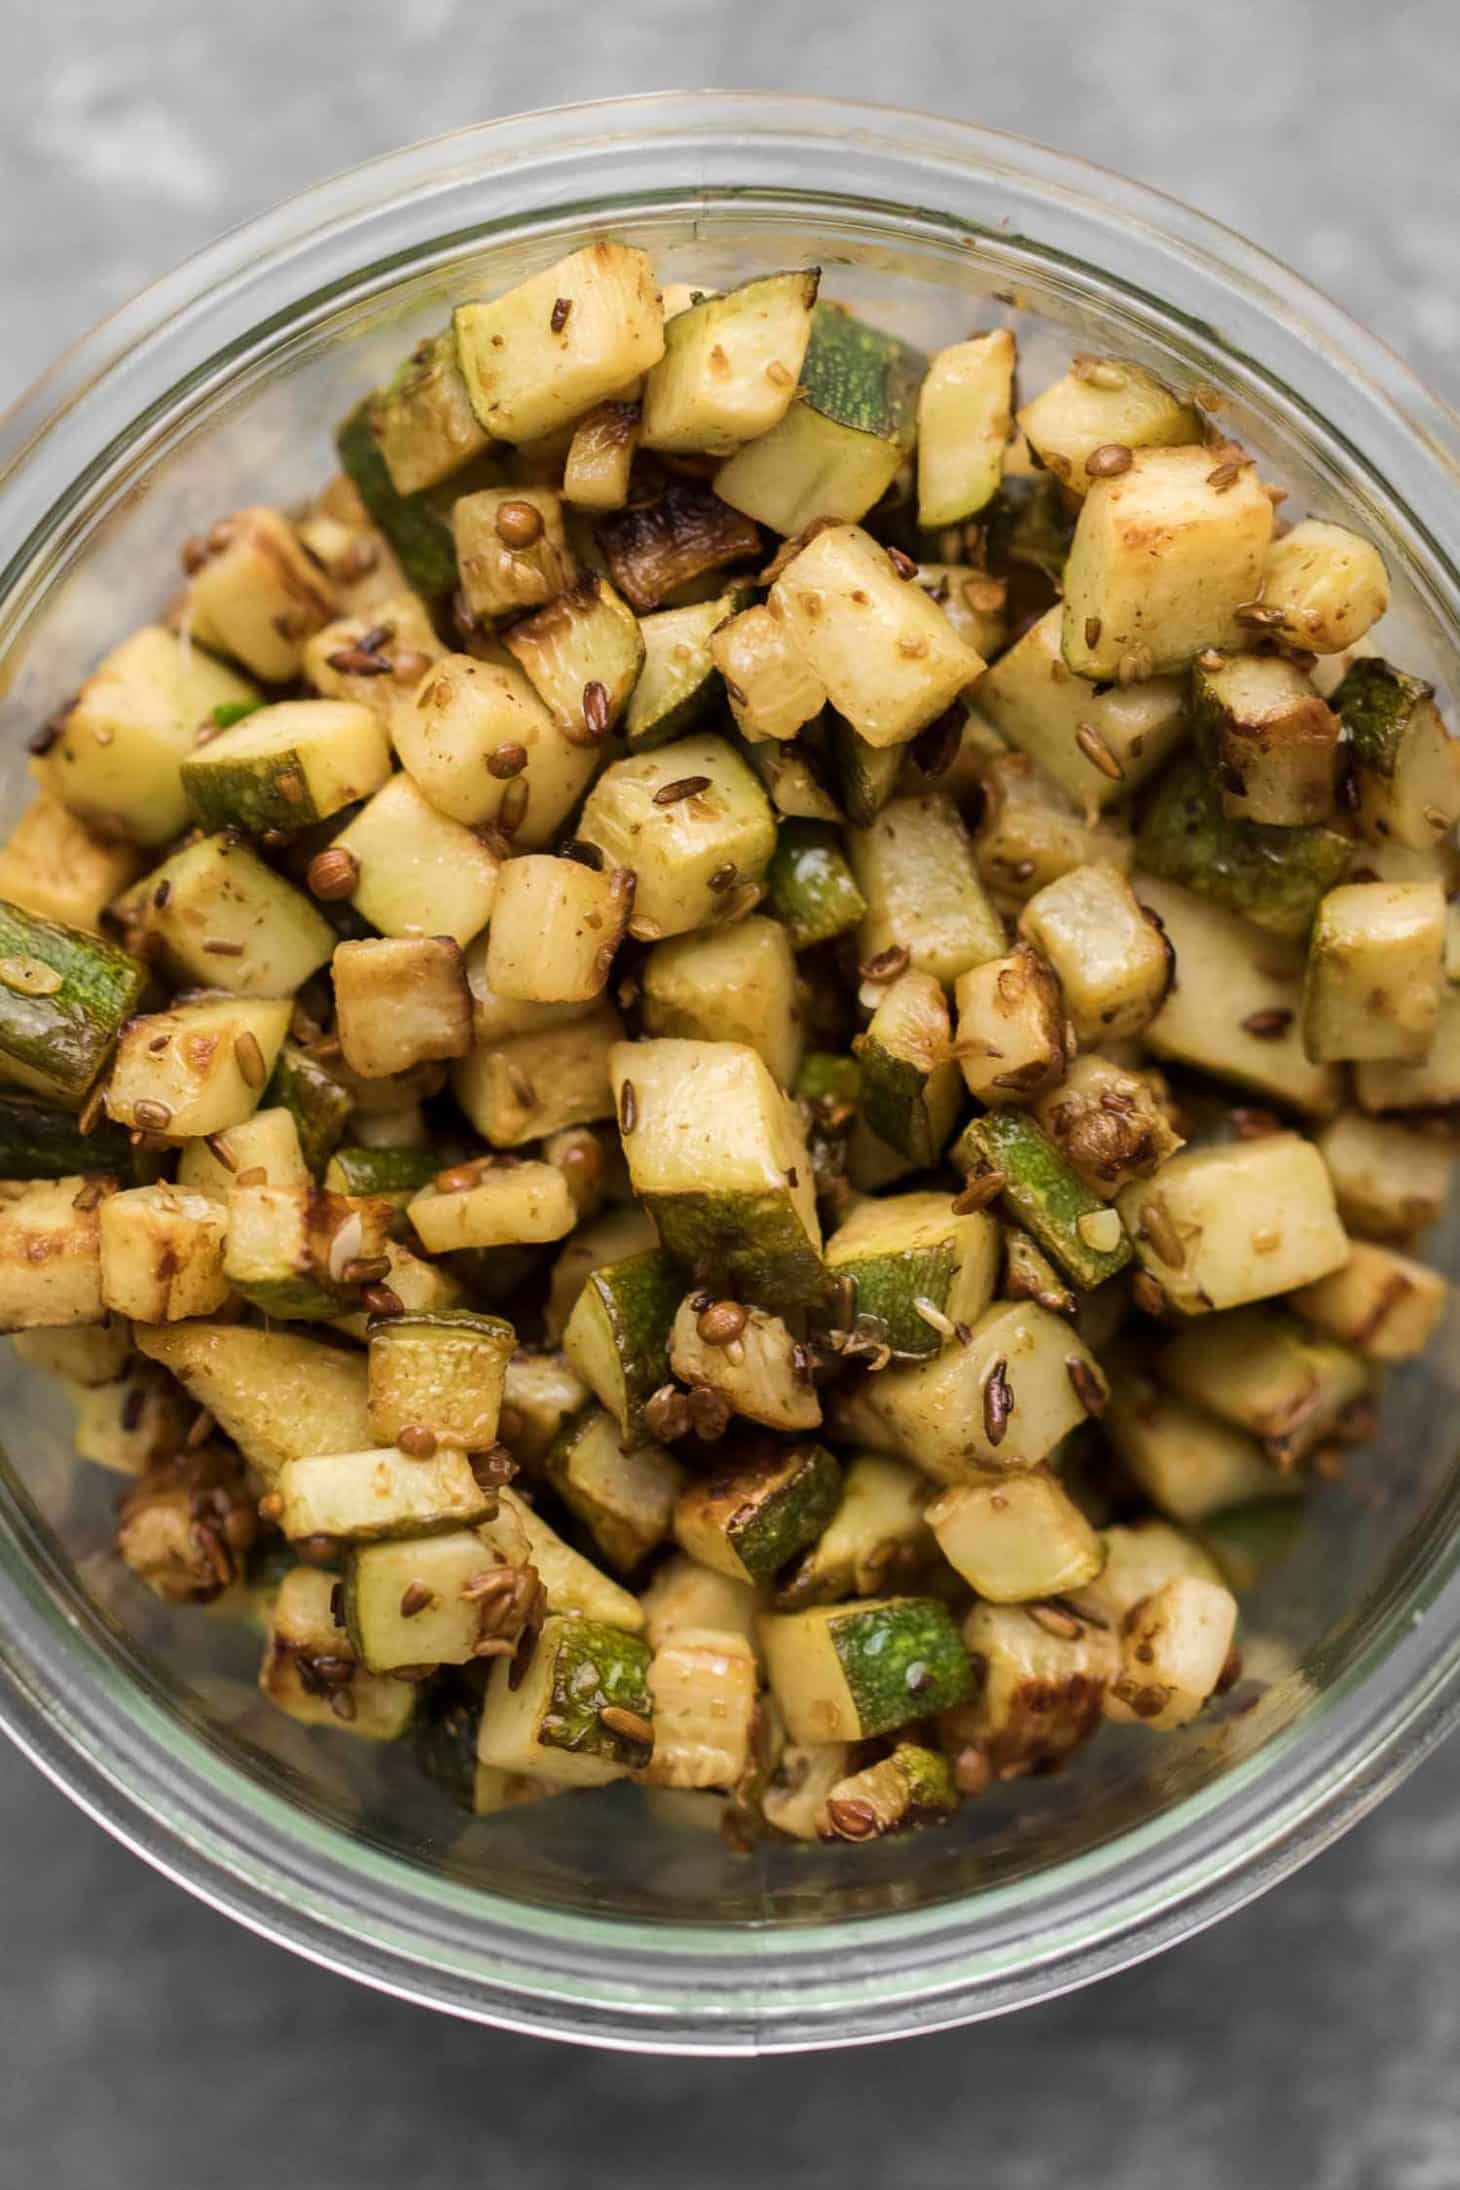 Spiced Zucchini | Component Cooking